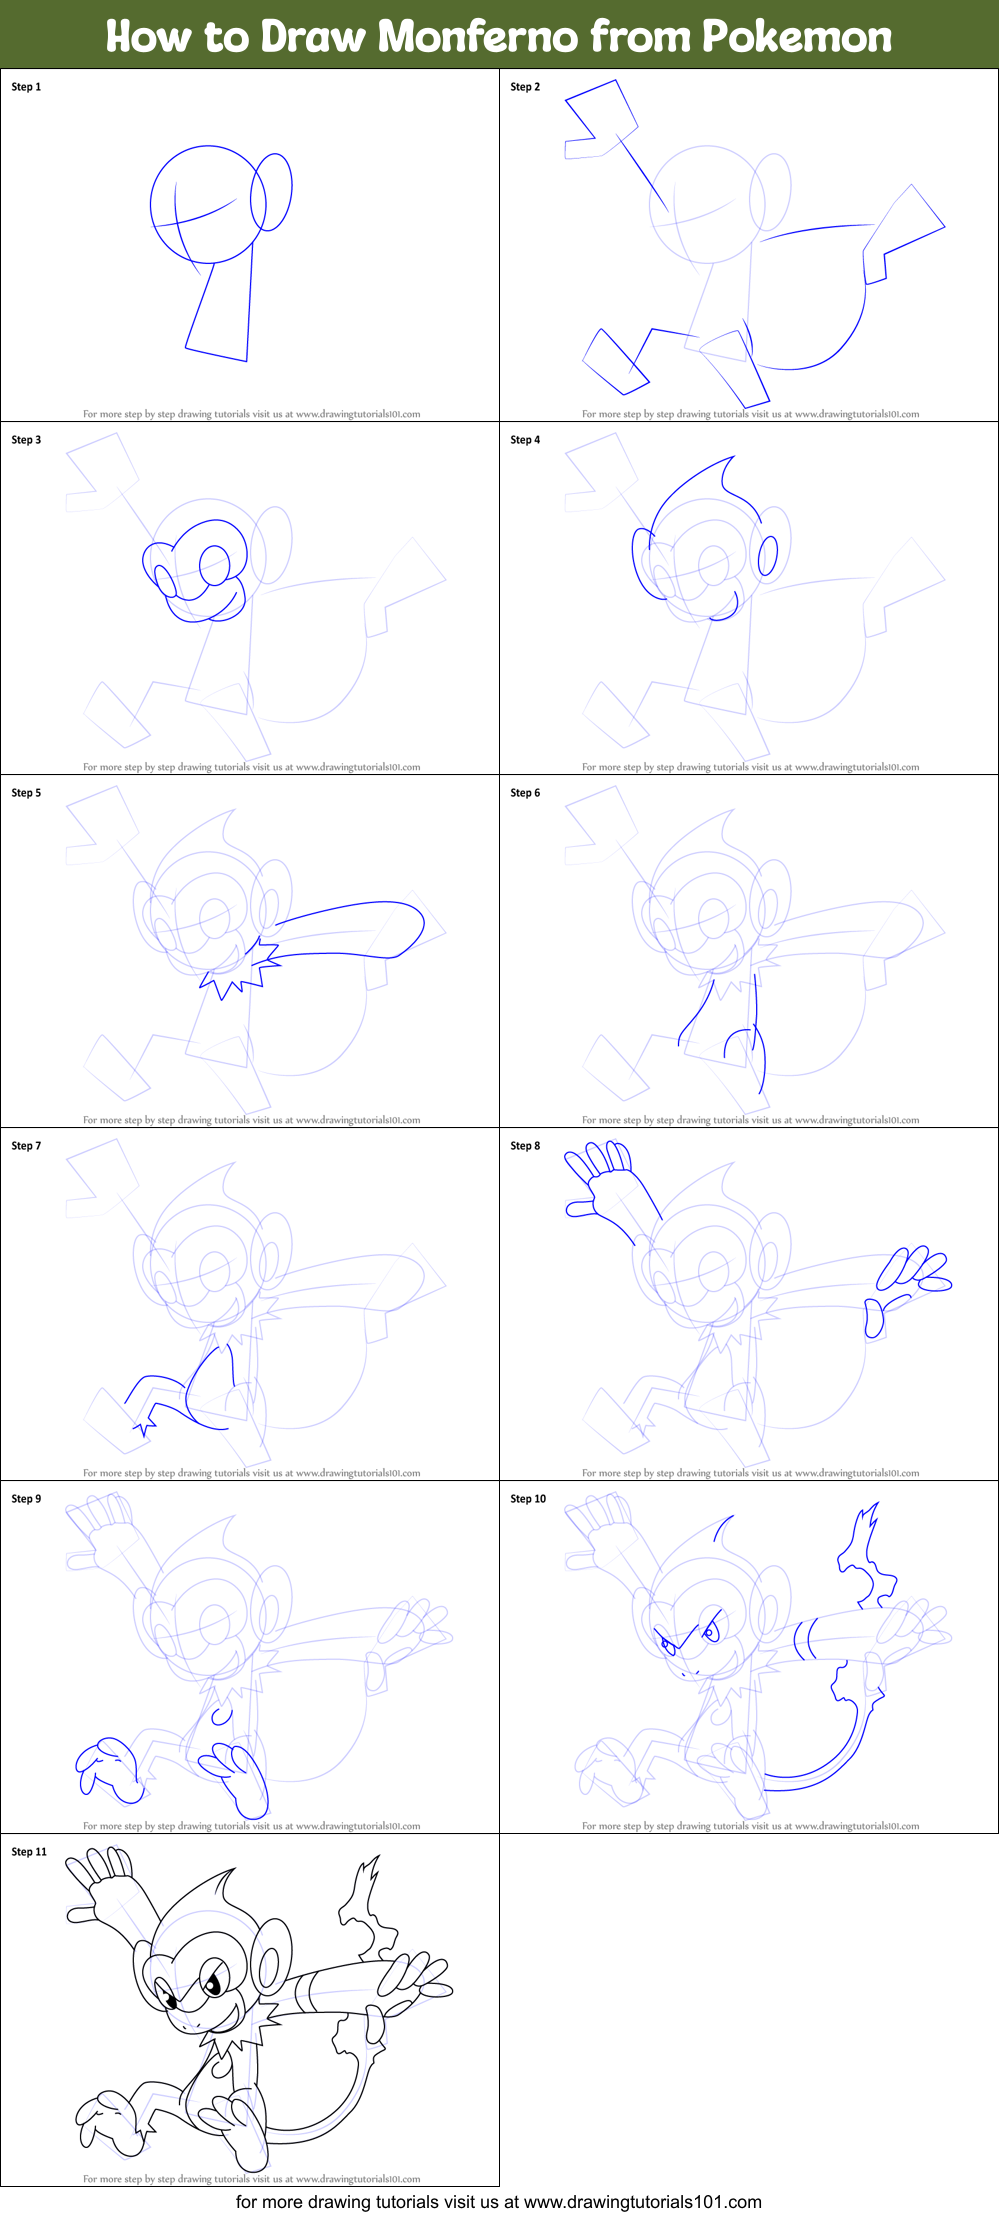 How to Draw Monferno from Pokemon printable step by step drawing sheet